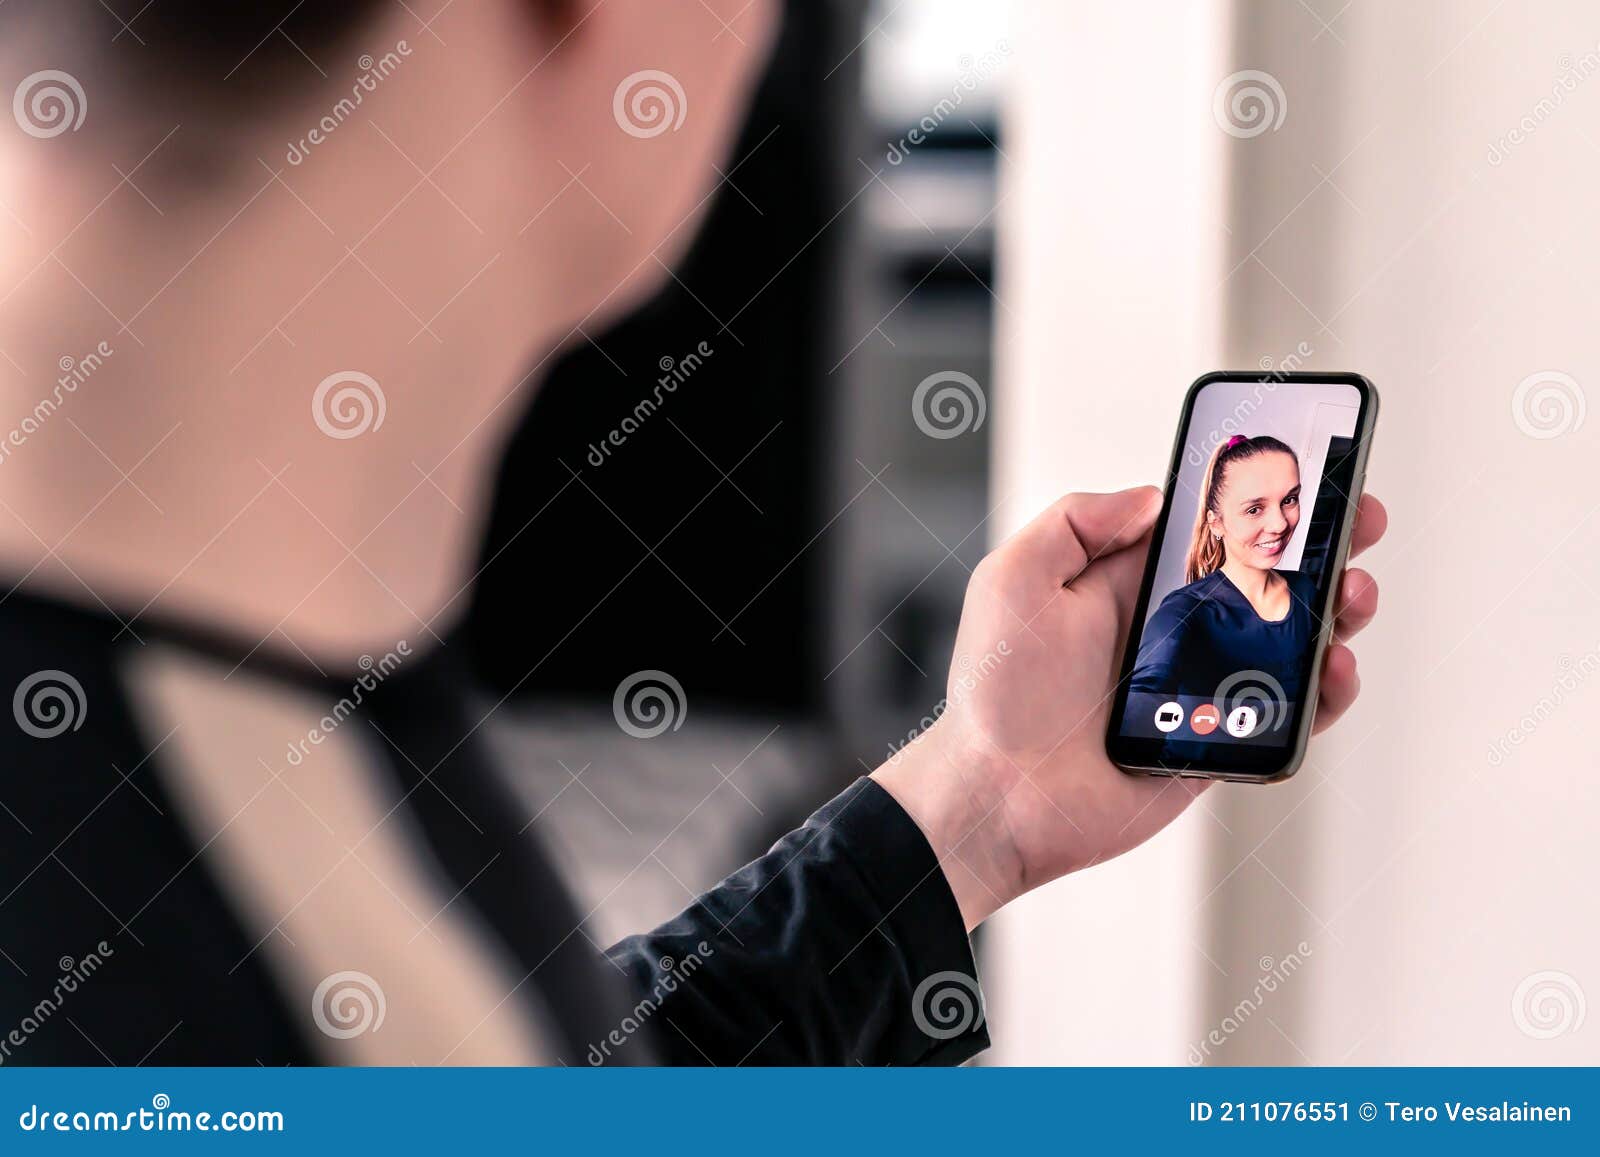 Video Call with Mobile Phone. Man and Woman Talking in Online Cam Chat and Virtual Meeting Conference on Internet. Smiling Face. Stock Image - Image of conference, distance: 211076551